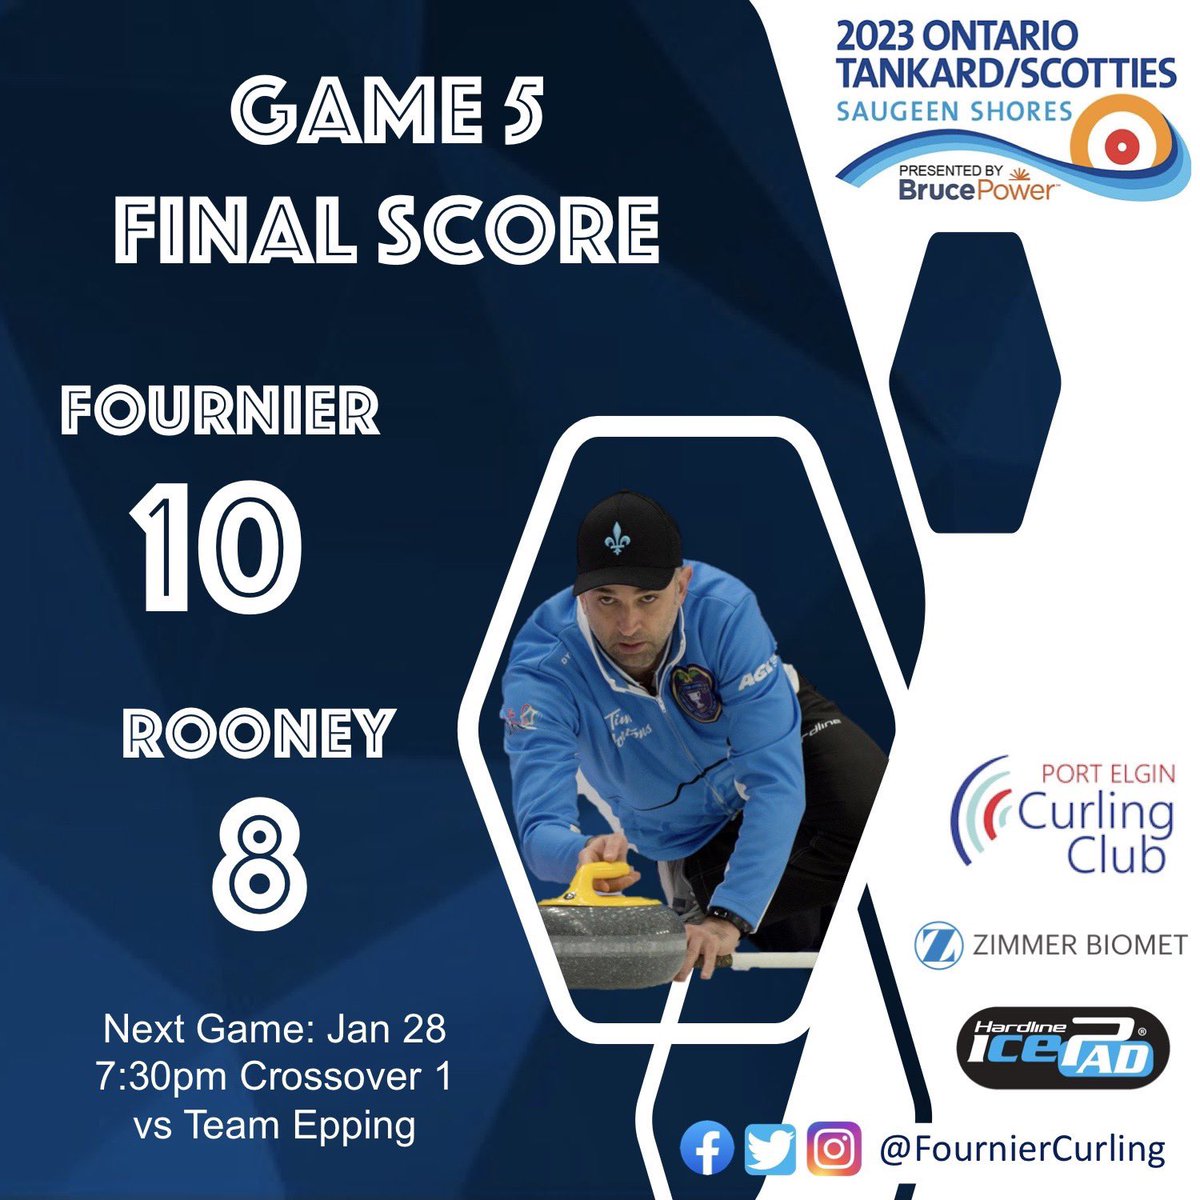 Make that 4 wins for FOURnier! We finish the round robin with a 4-1 record and advance to the Crossovers beginning tonight at 7:30pm. Catch us on sheet D against Team Epping! 💪🥌👊
#hardlinenation #fourniercurling #trilliumgrind